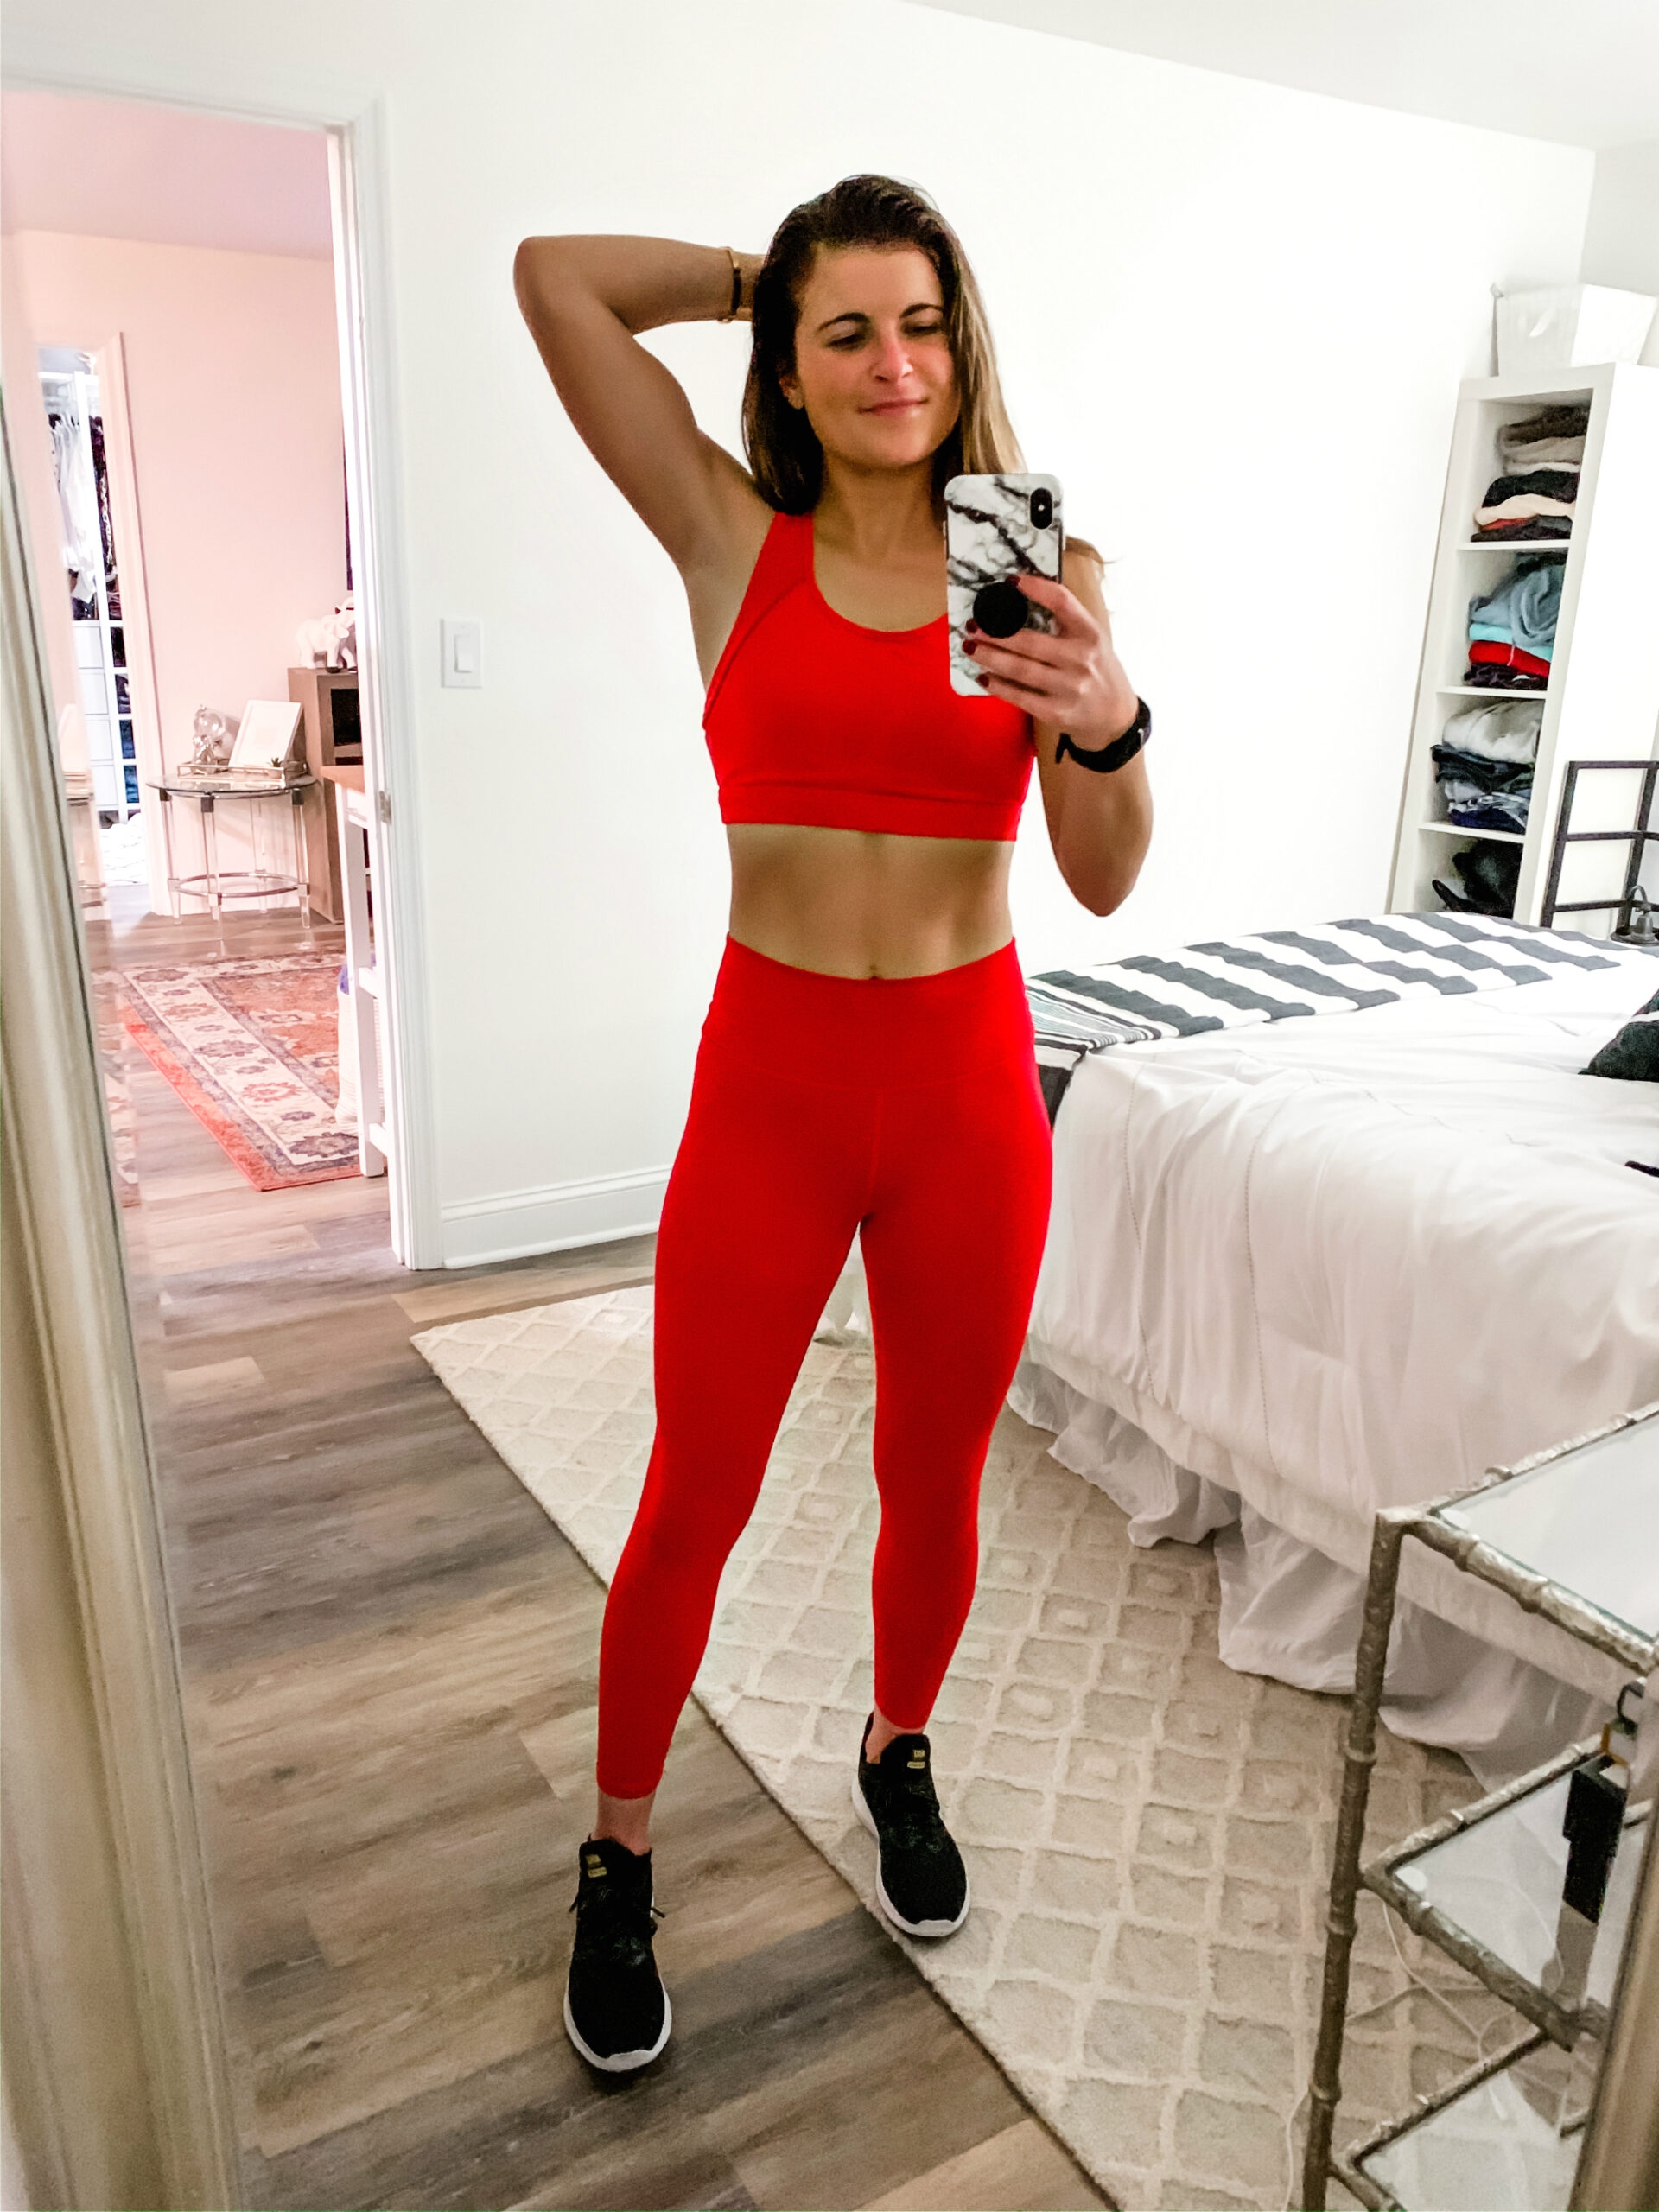 Fabletics Katelyn Medium Impact Sports Bra in Persimmon, Fabletics High-Waisted PowerHold® 7/8 Legging in Persimmon, Red Activewear Set, Tilden of To Be Bright